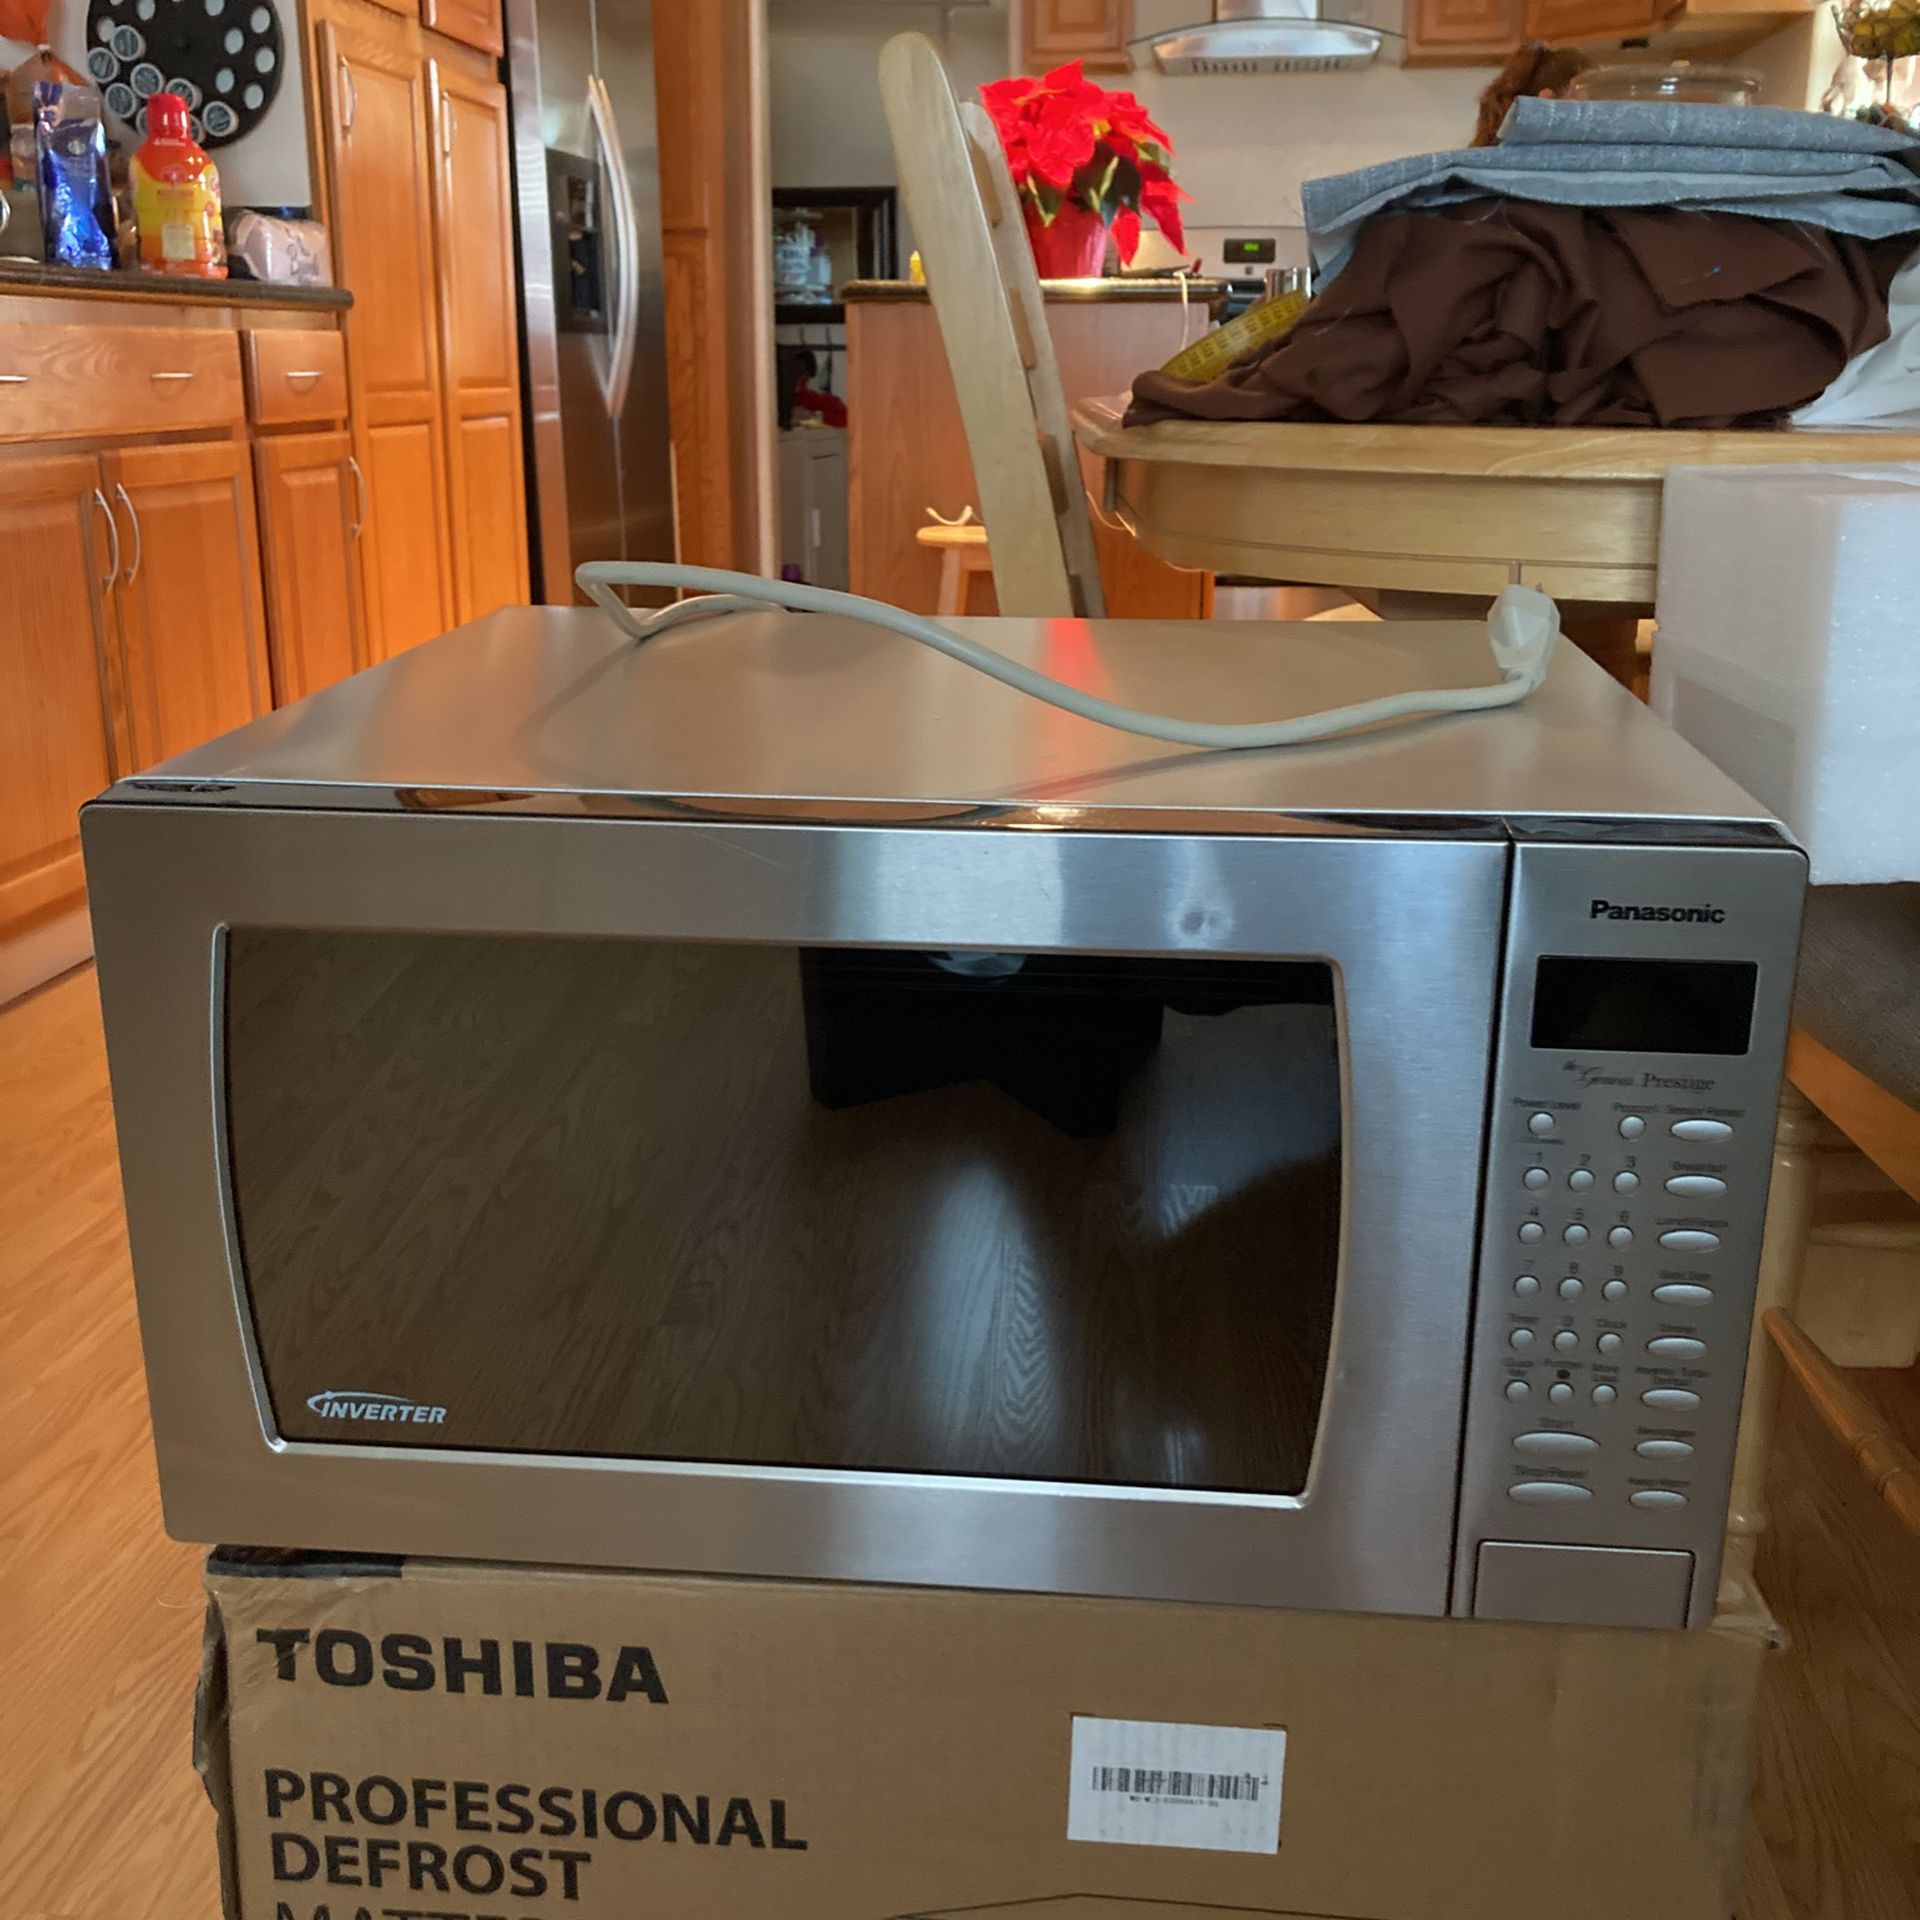 Microwave $70, air fry $80, End Toaster$40